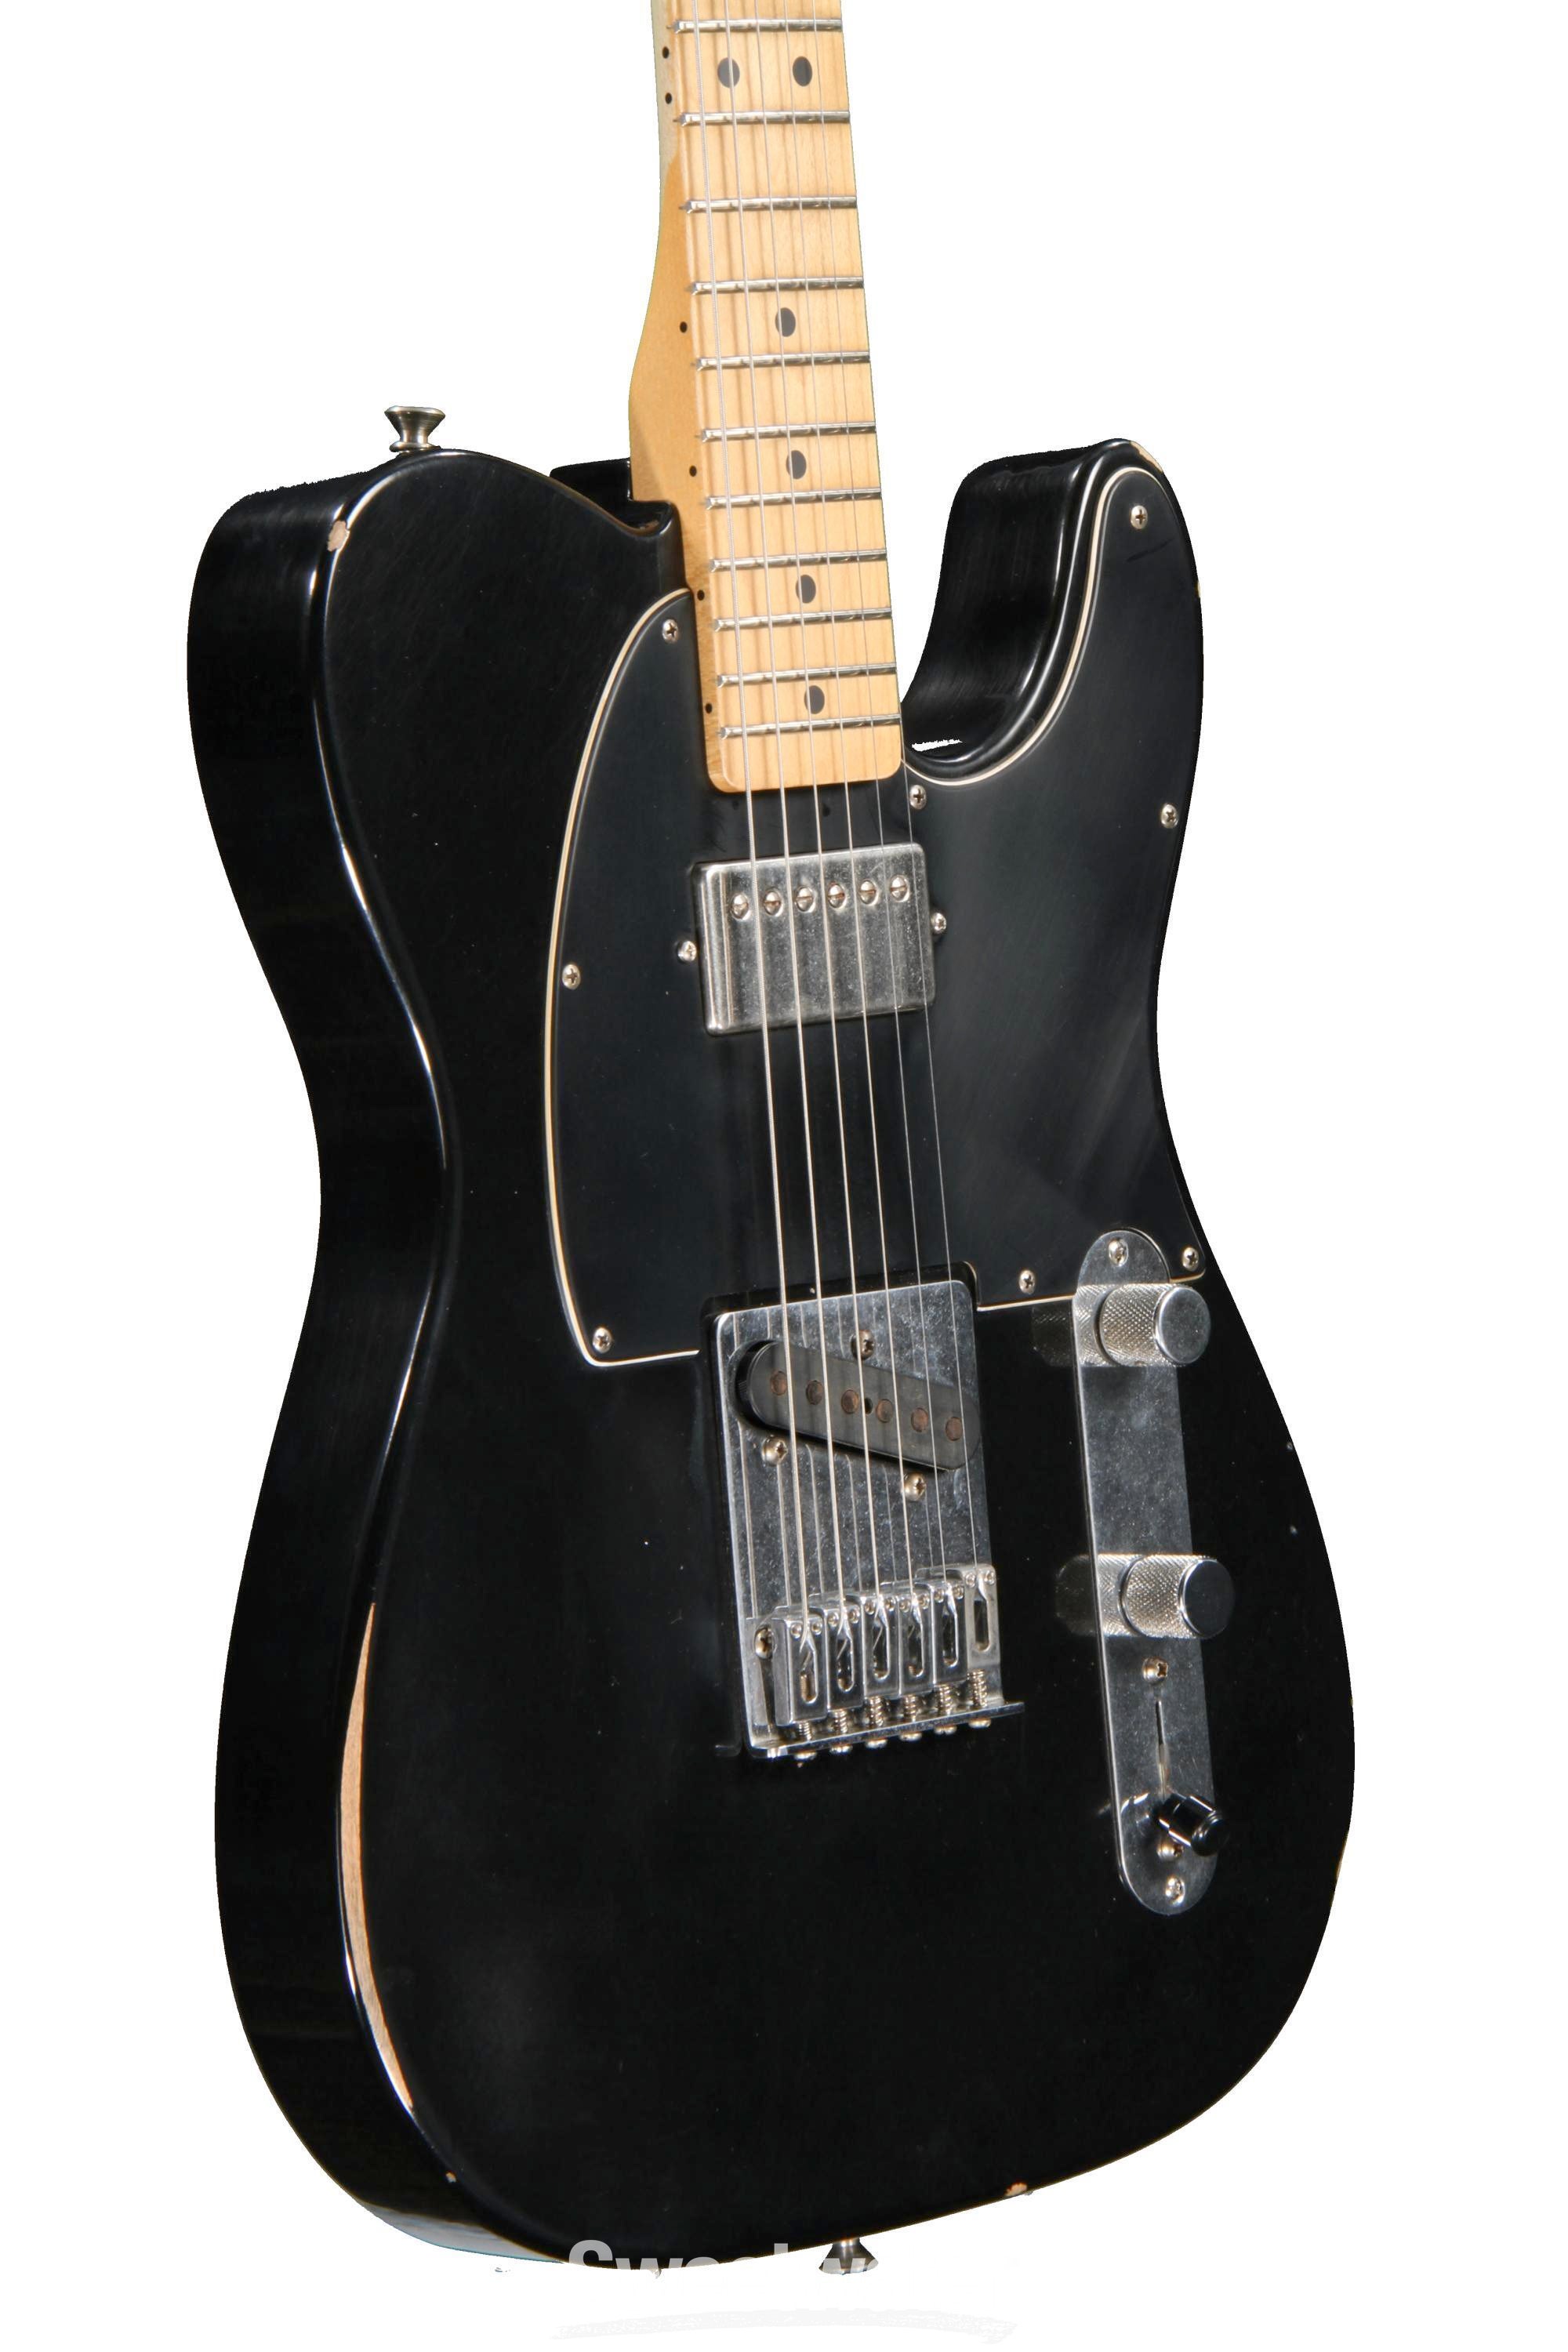 Fender Road Worn Player Telecaster - Black | Sweetwater